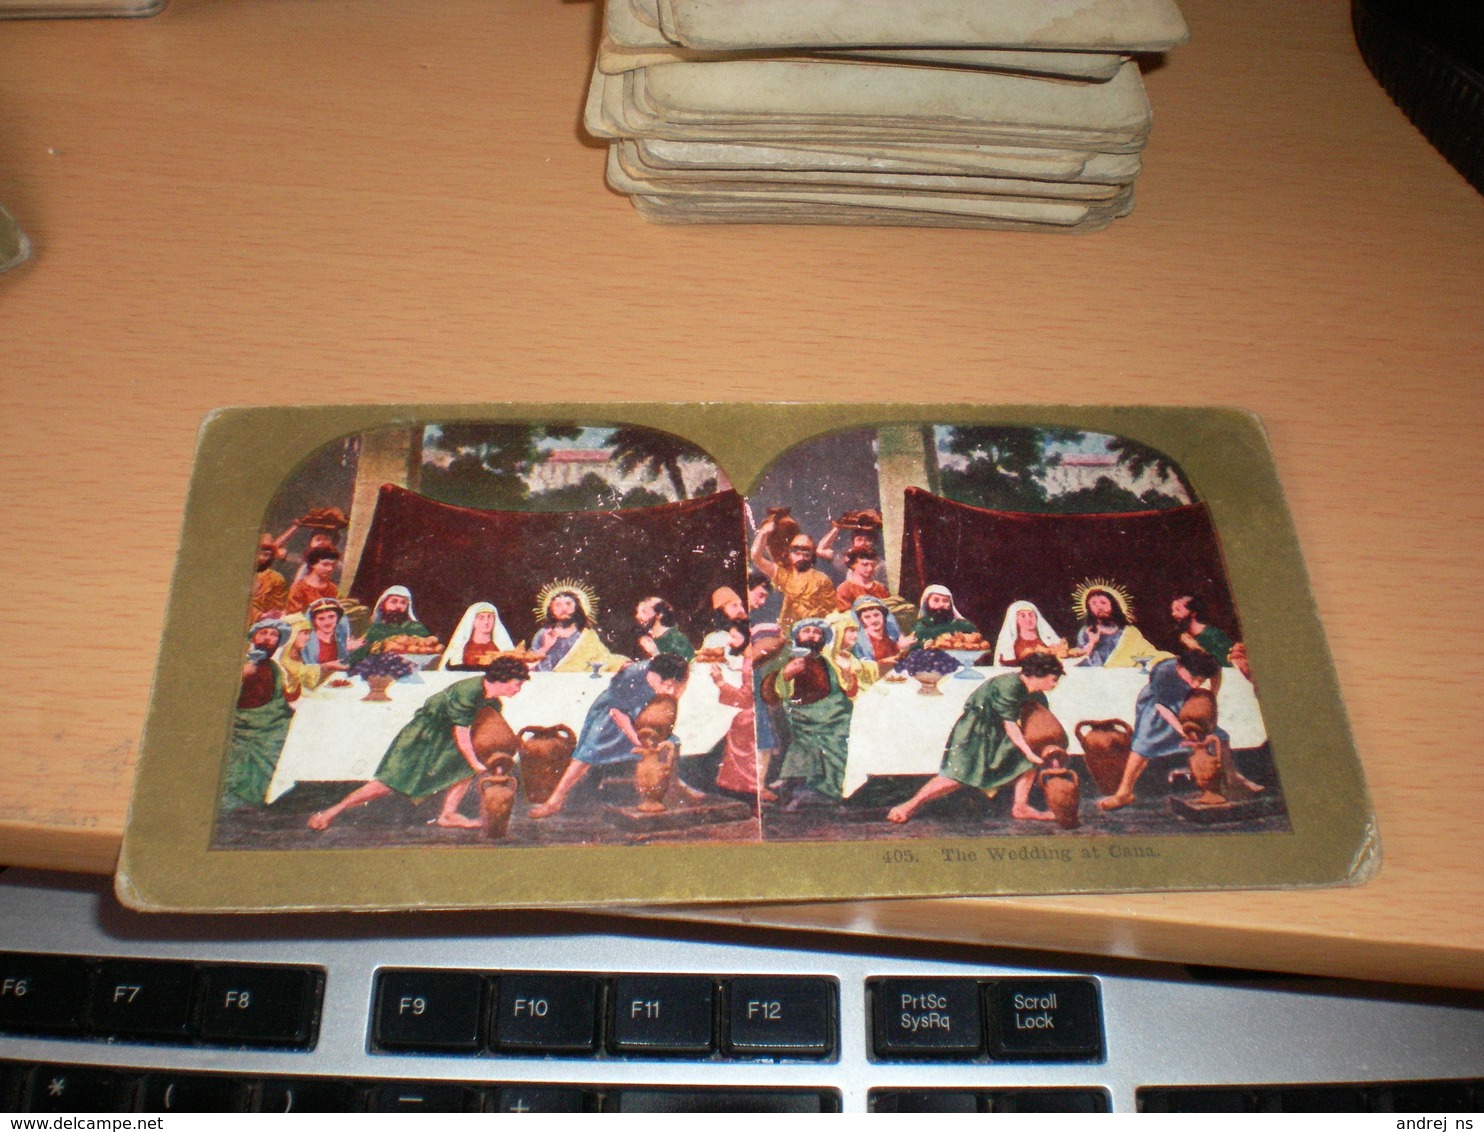 The Wedding At Cana - Stereoscopes - Side-by-side Viewers